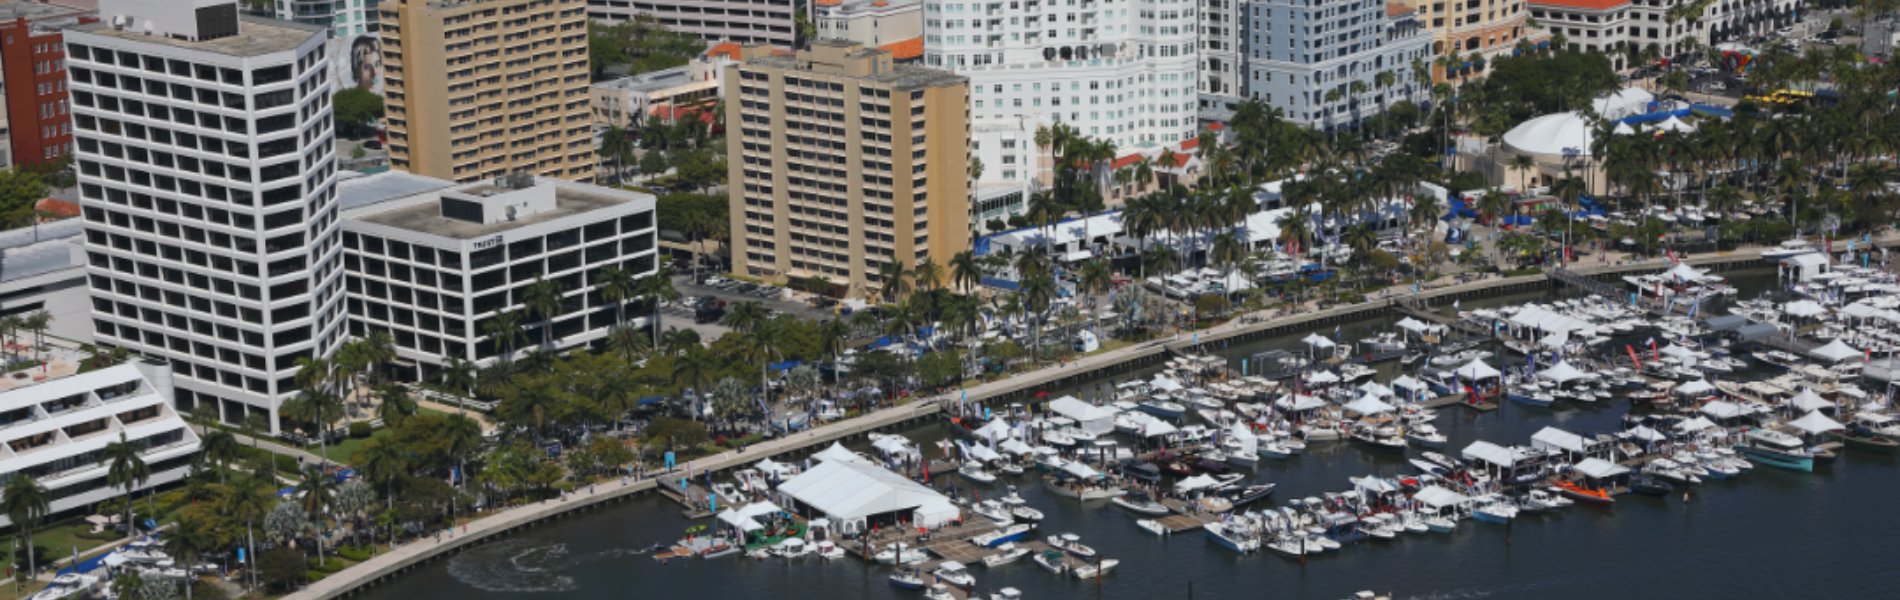 Come See ugo® At The Palm Beach International Boat Show!